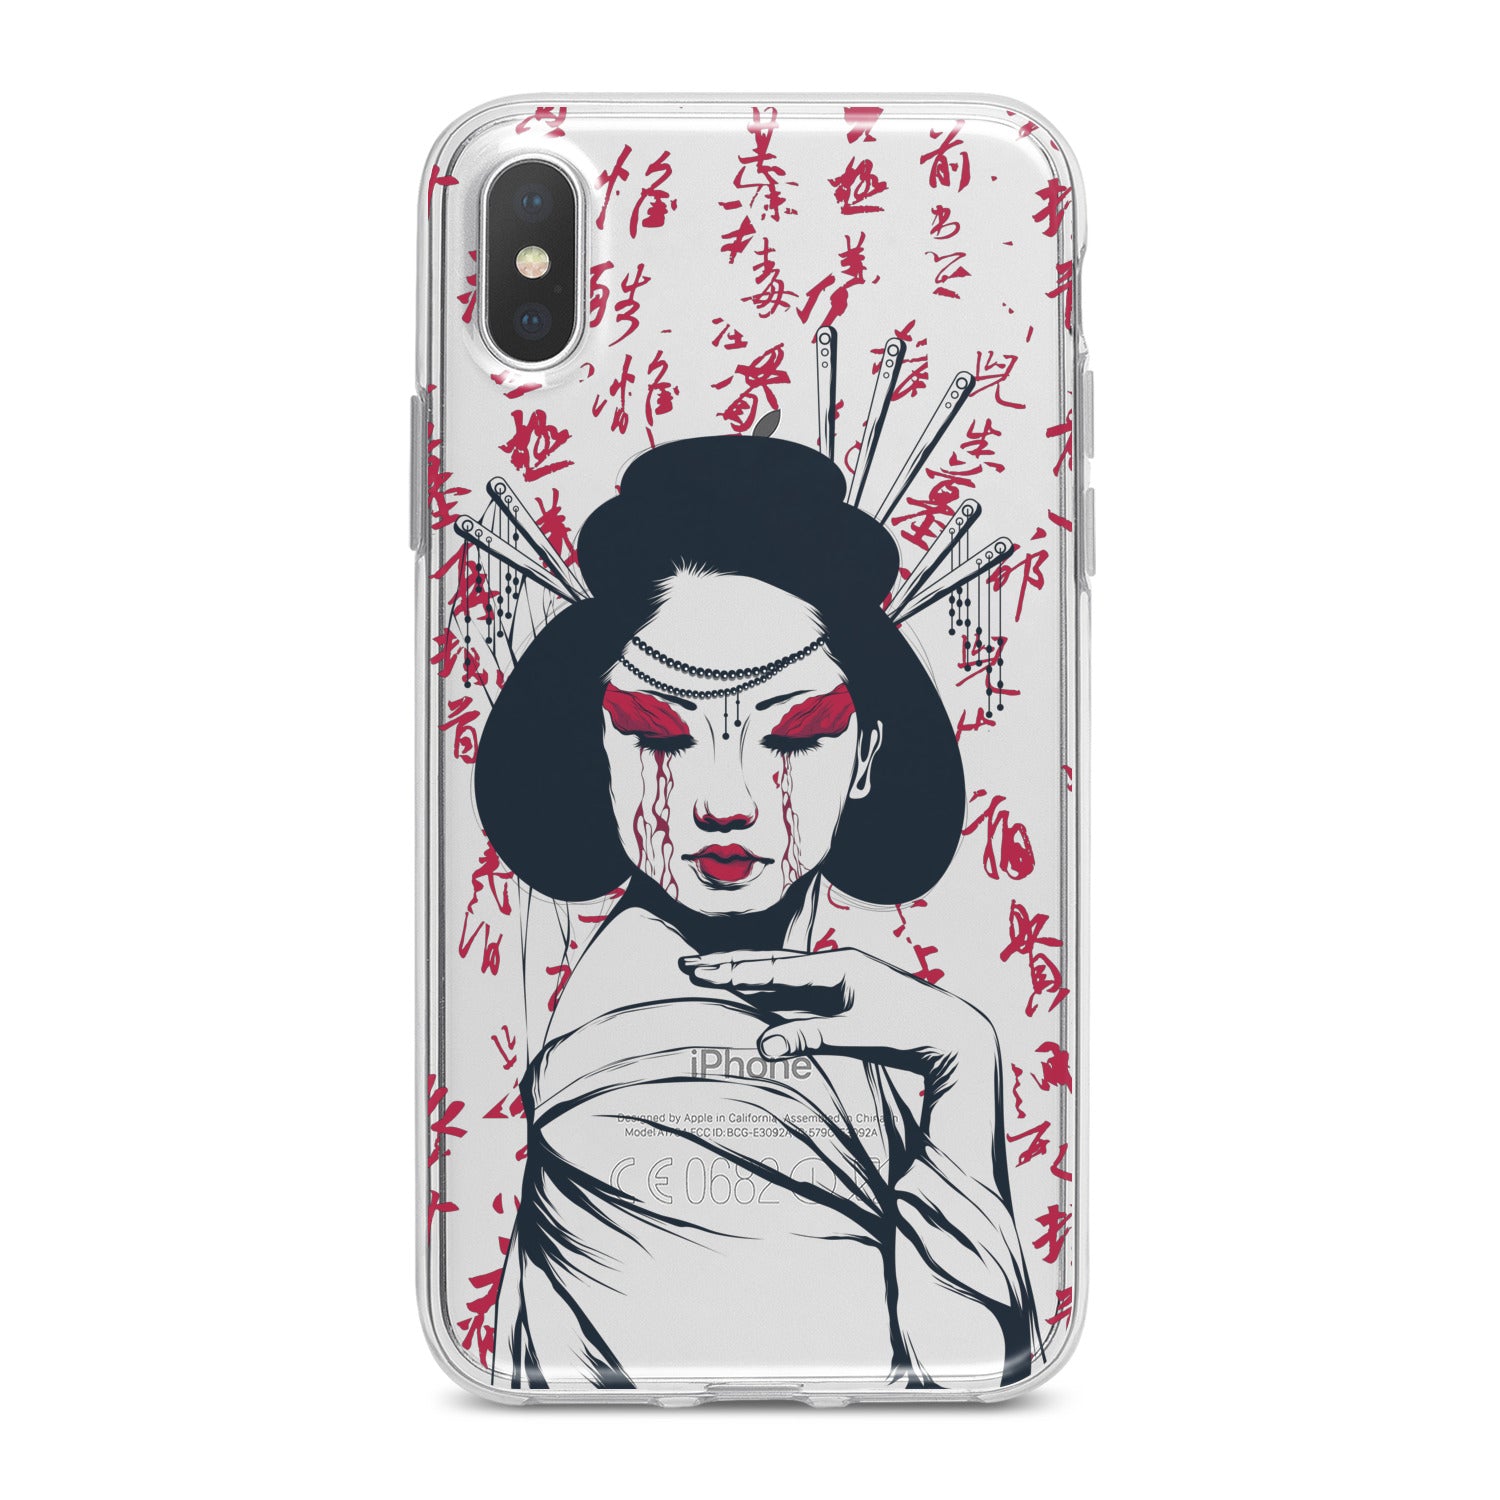 Lex Altern Japan Lady Phone Case for your iPhone & Android phone.